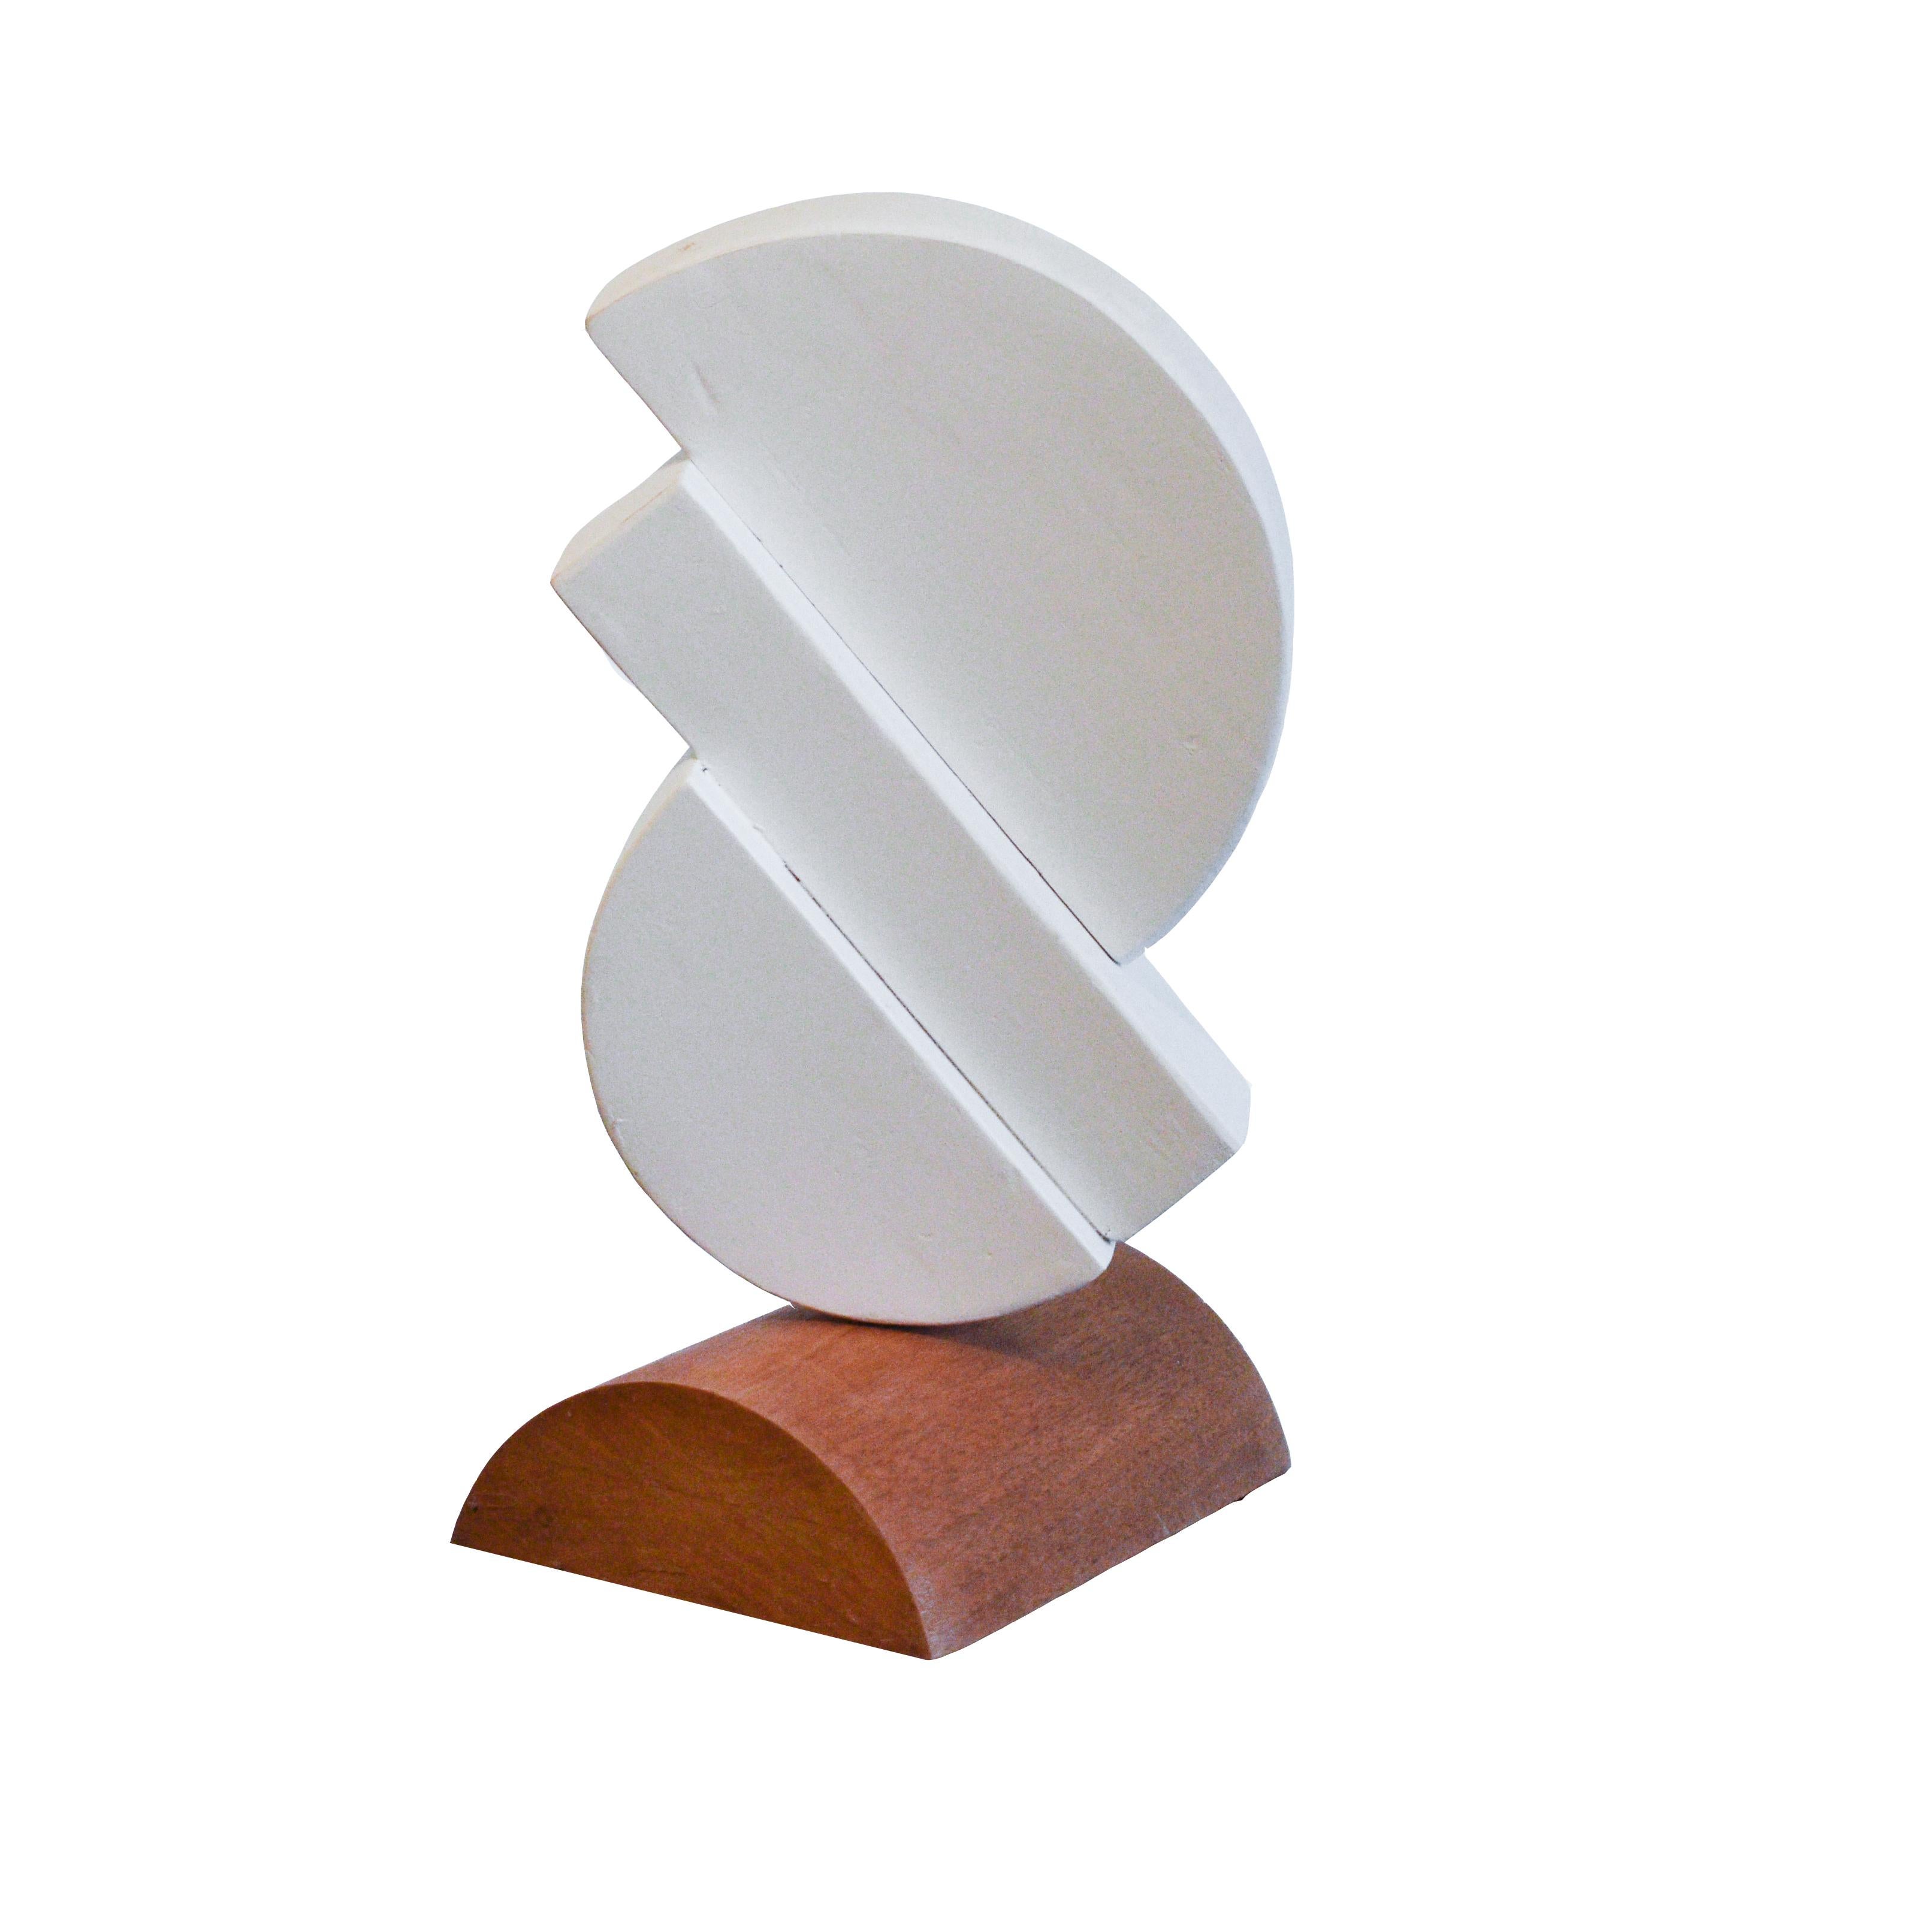 Mid-Century Modern abstract sculpture of a white painted abstract geometric wooden object
